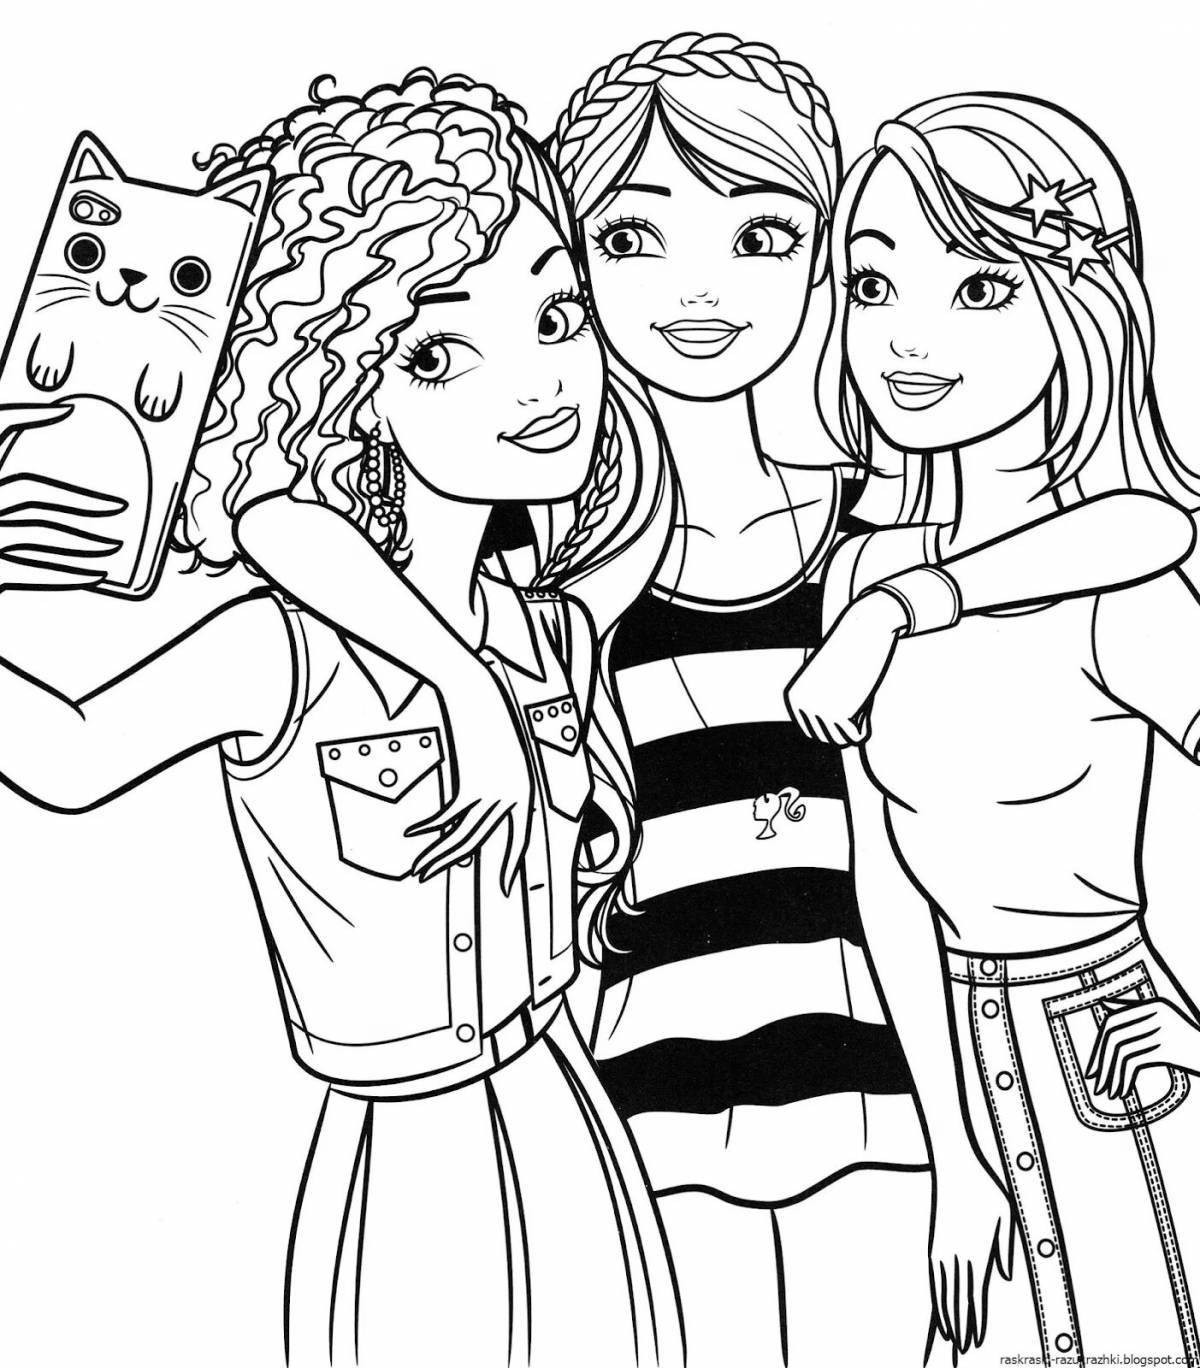 Fun coloring book for girls 11-12 years old